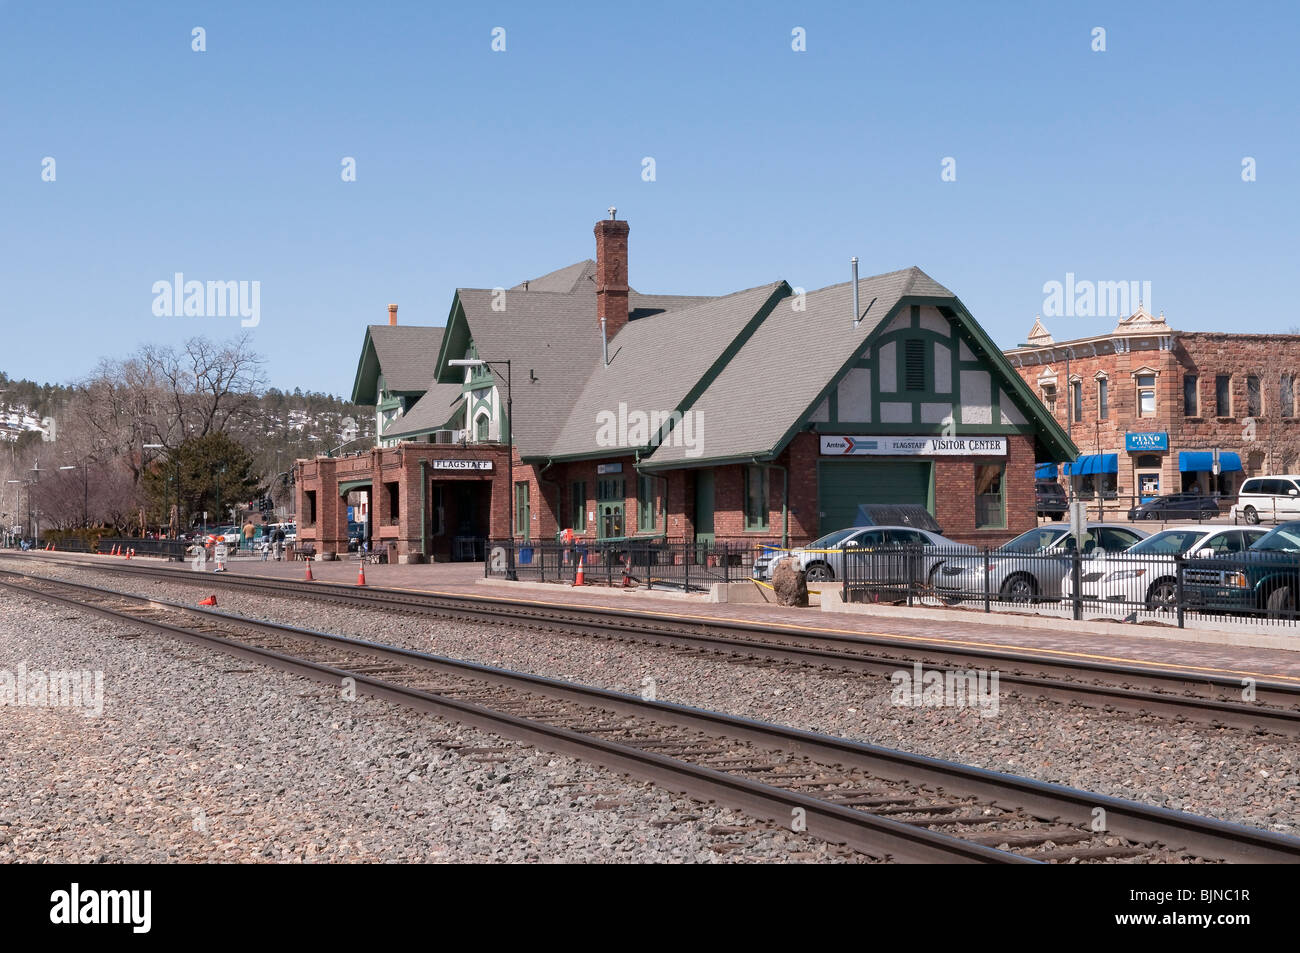 The railway station and visitor centre at Flagstaff, Arizona Stock Photo